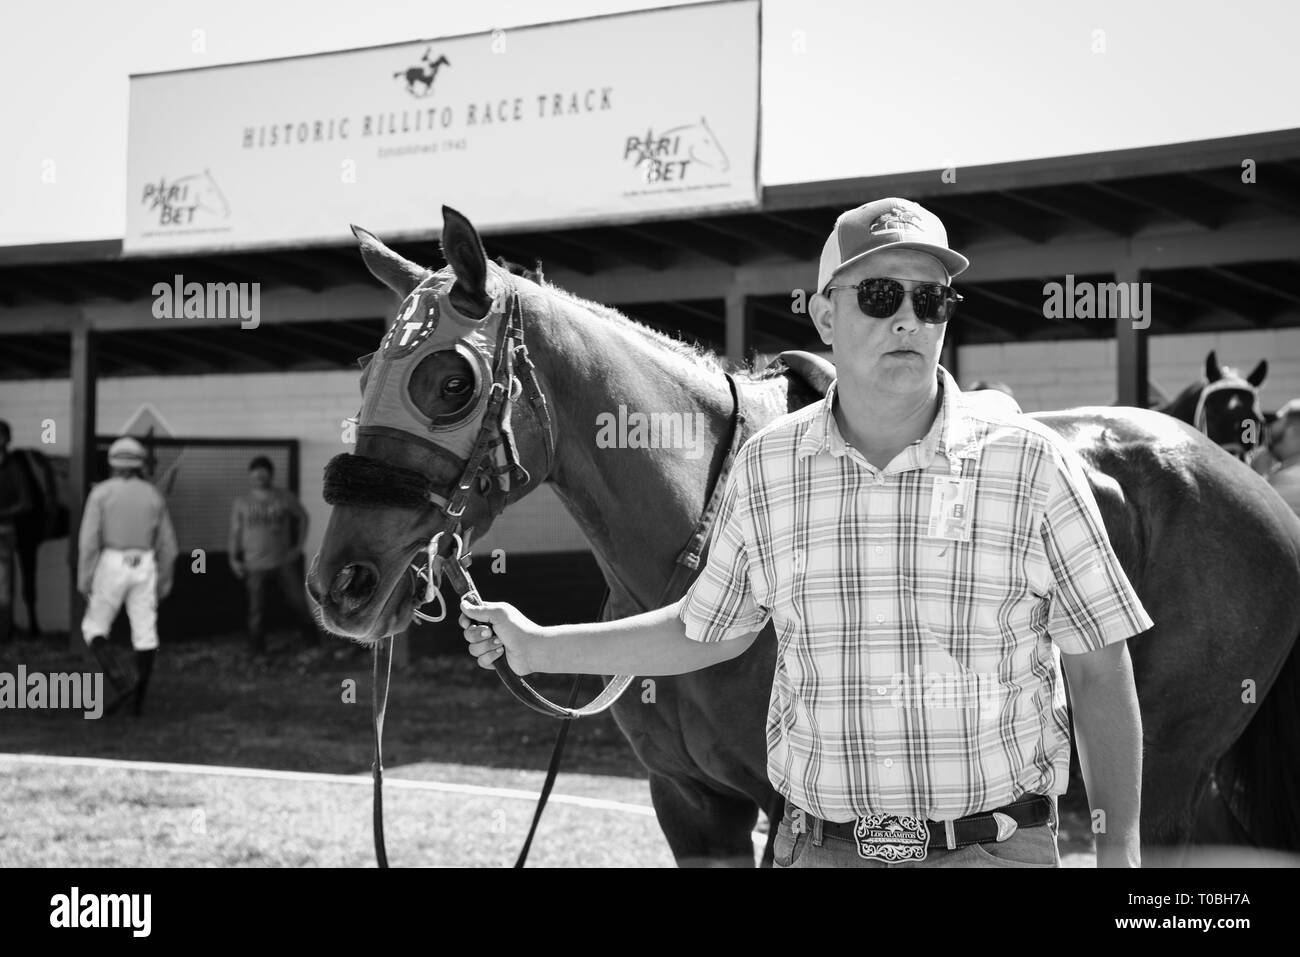 Thourghbreed race horse with blinders is handled by trainer in paddock before a race at the Rillito Park Racetrack in Tucson, AZ, in black and white Stock Photo